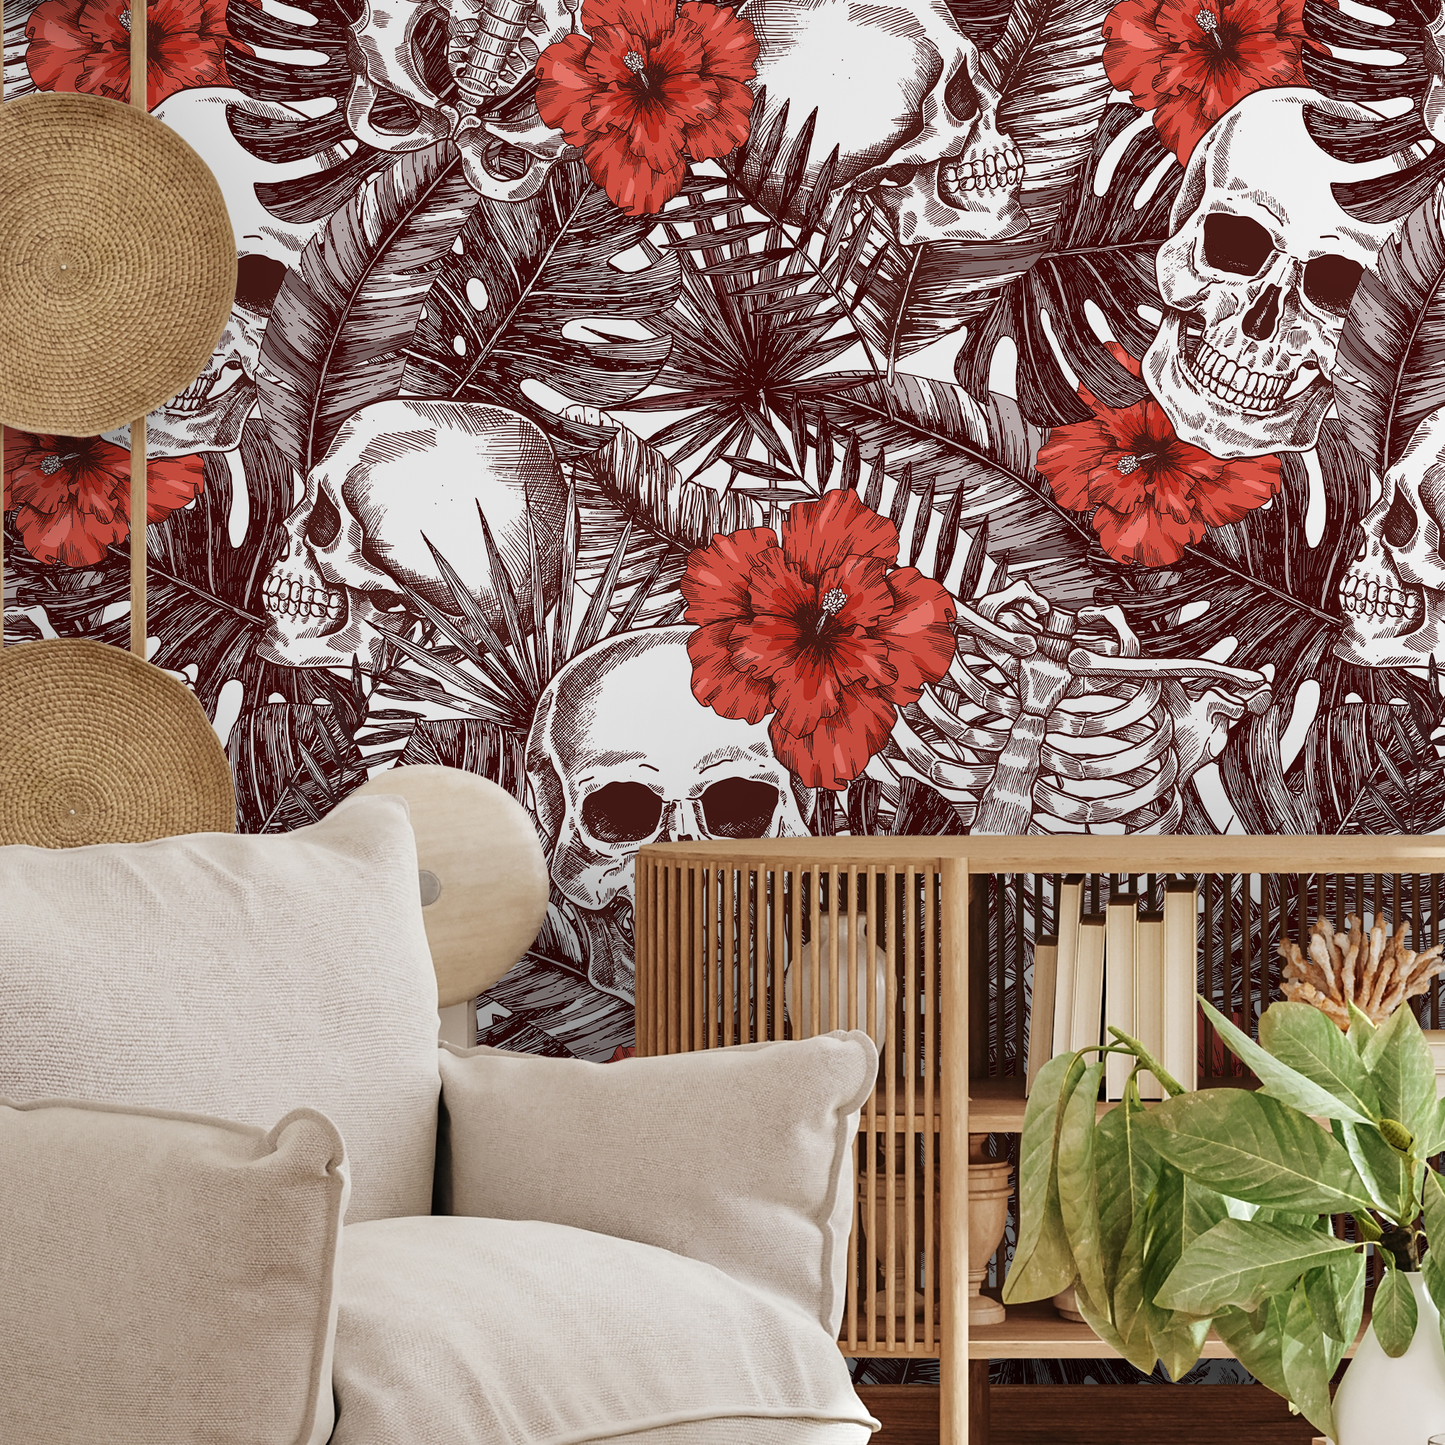 Tropical Floral Skull Wallpaper Peel and Stick and Traditional Wallpaper - A445